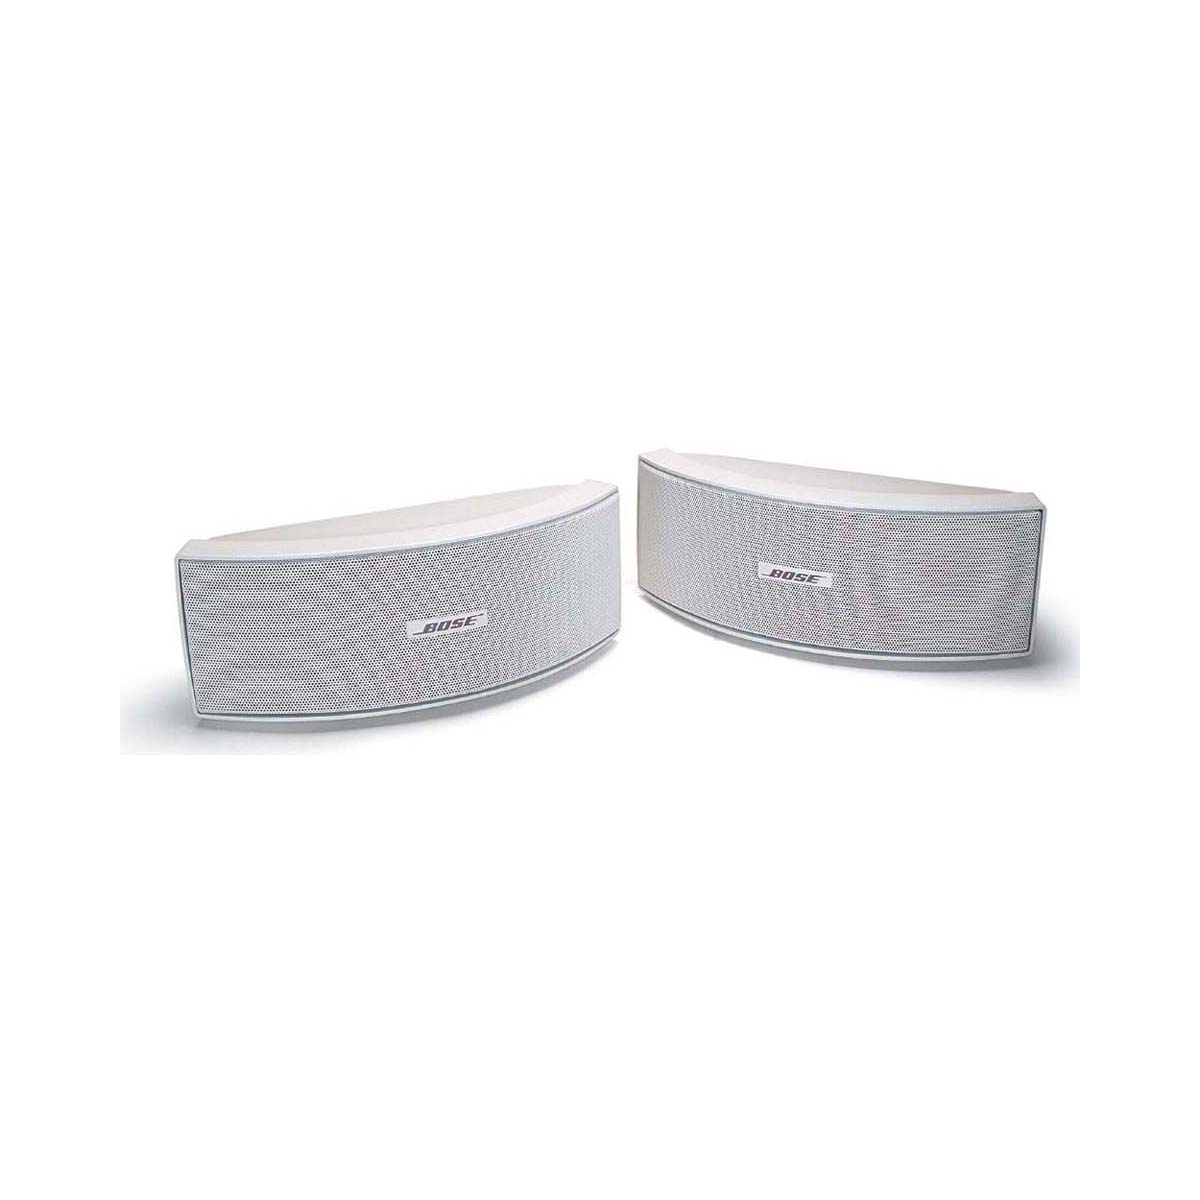 Bose Stereo Speakers in white